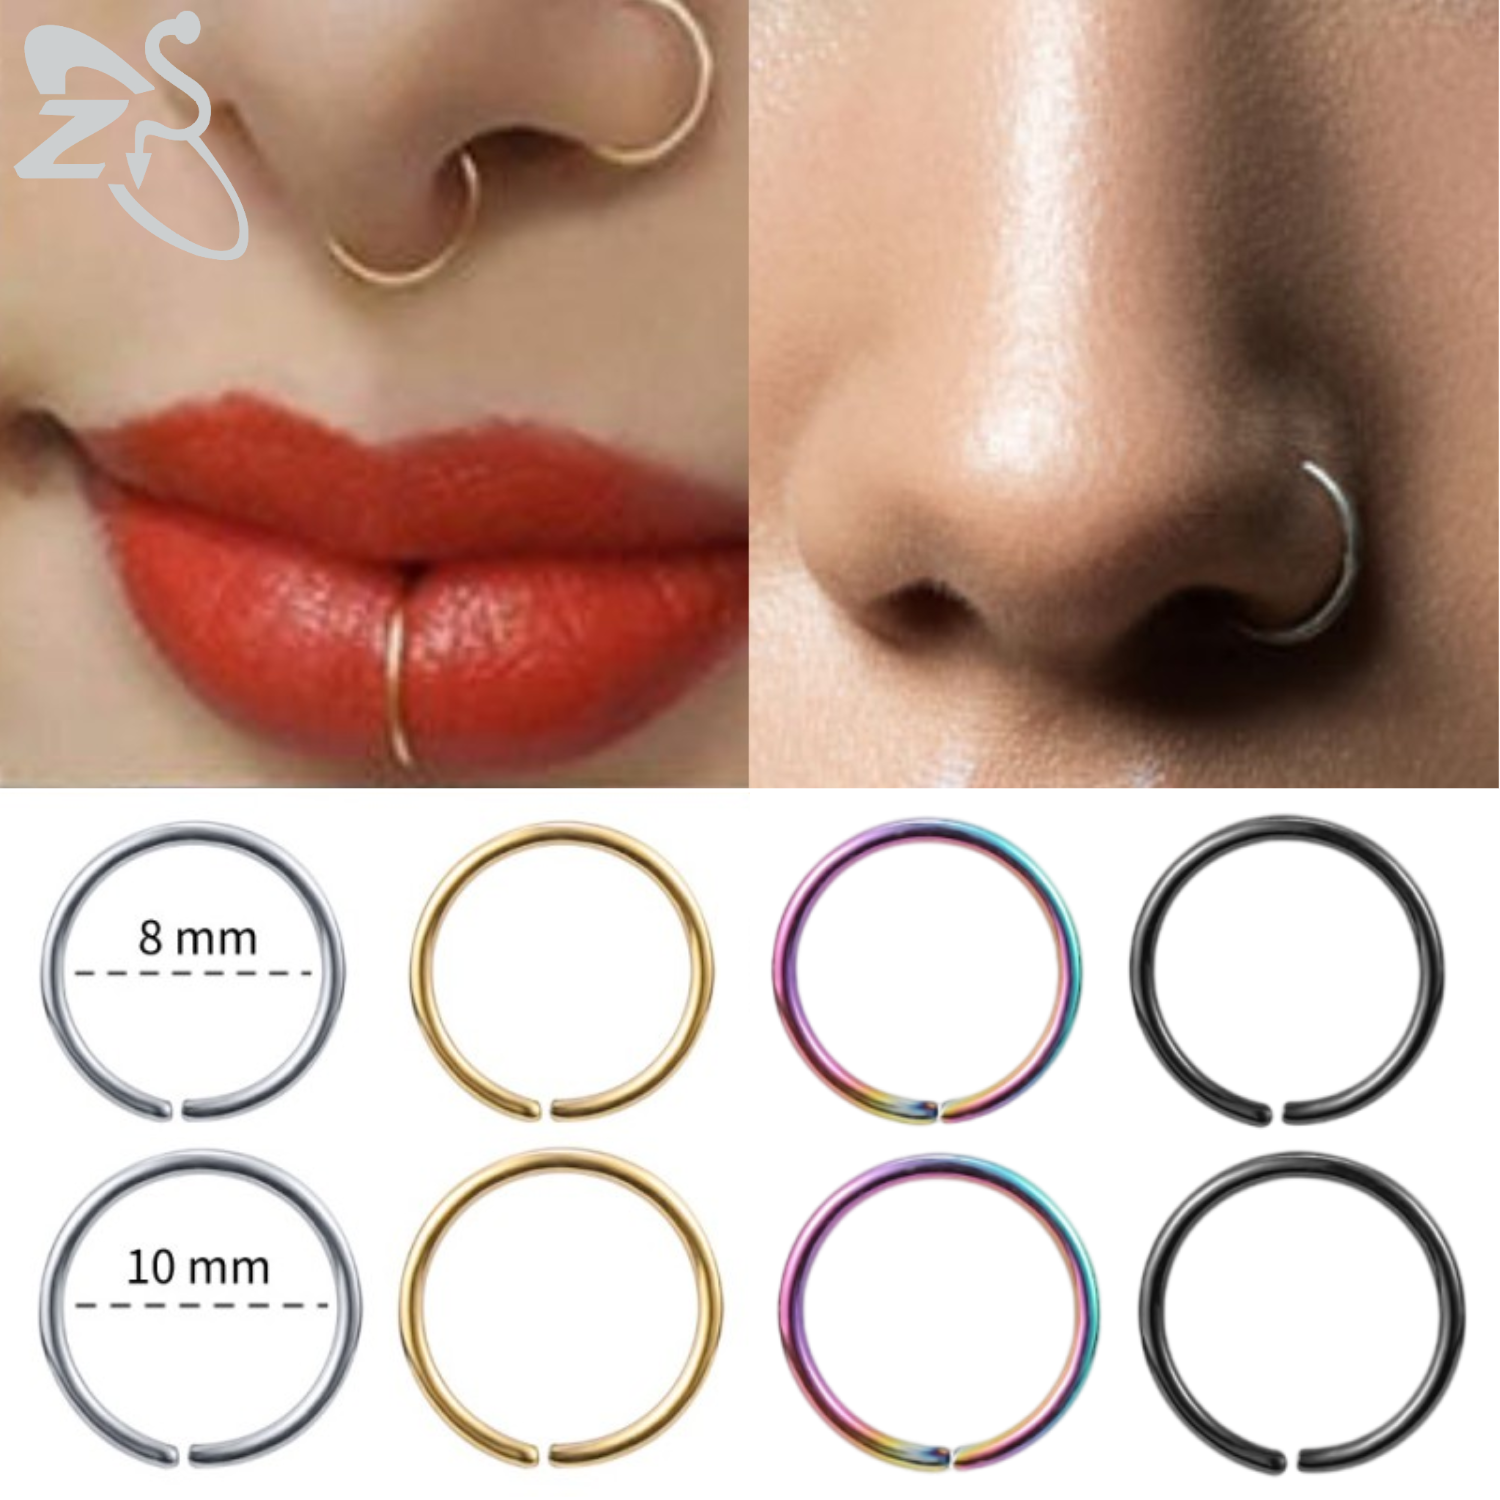 ZS 20G Silver Gold Stainless Steel Nose Rings Round Earrings Septum Rings